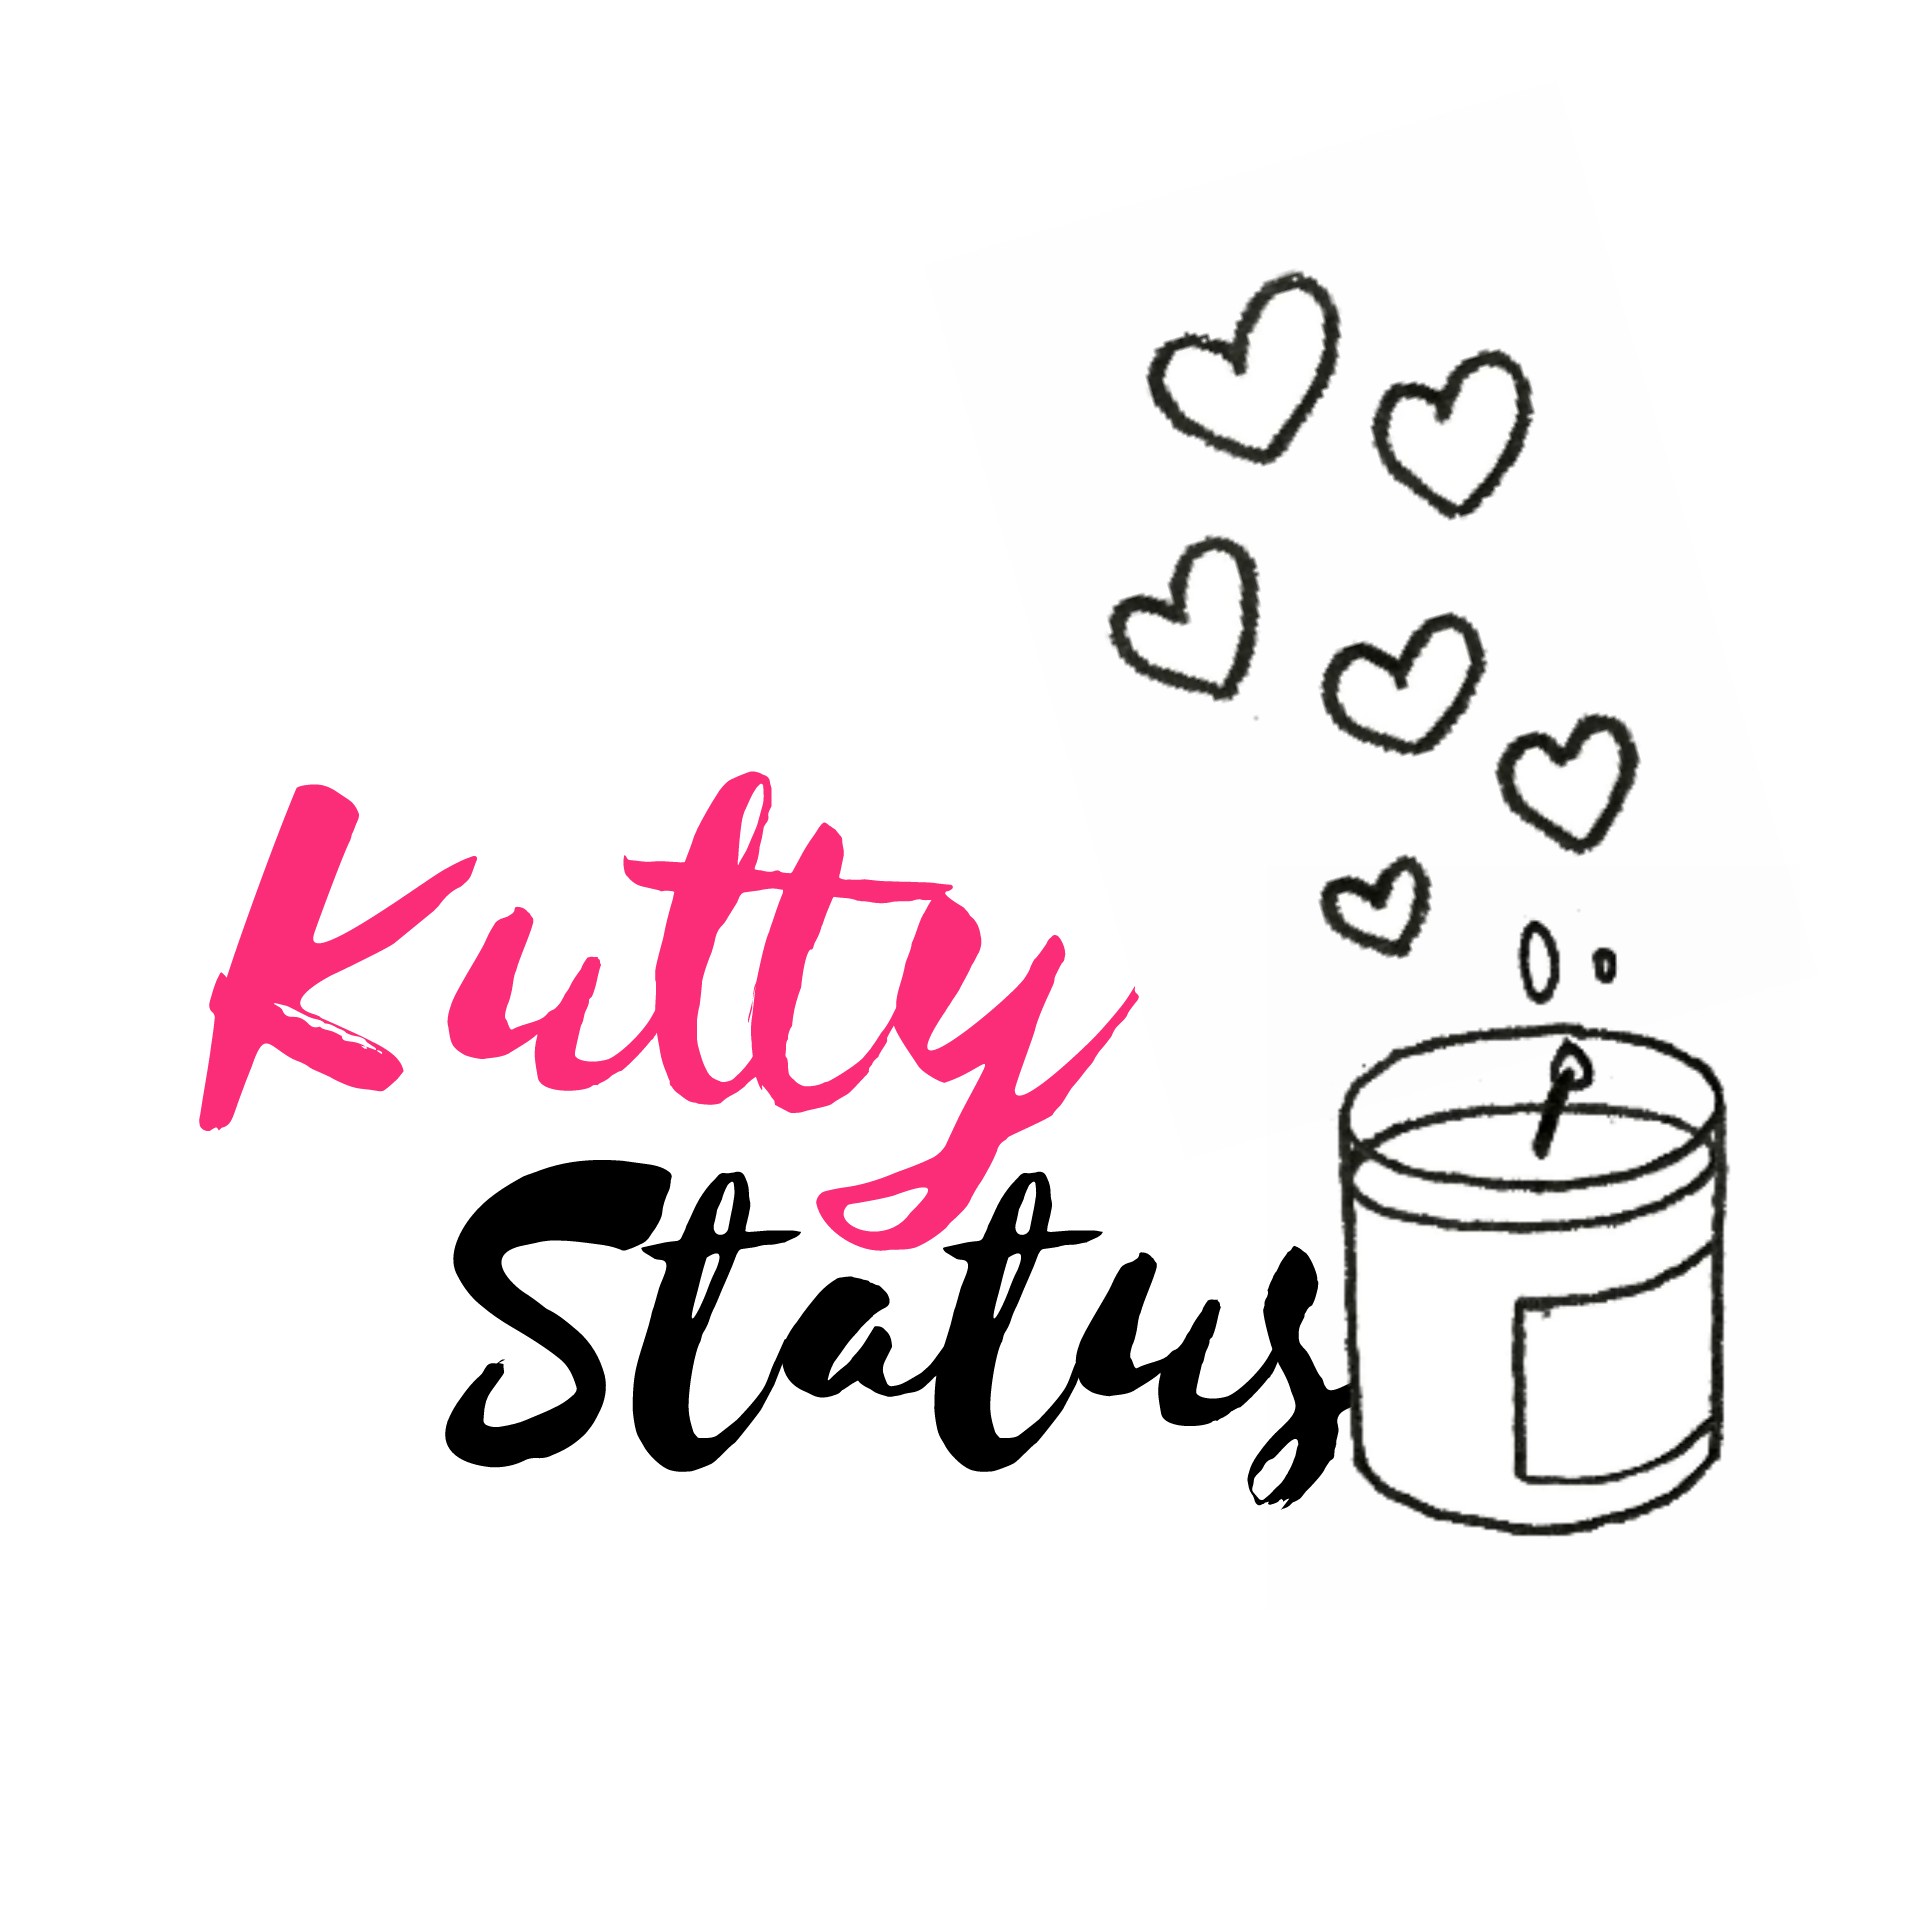 kutty status (@78021813) • ShareChat Photos and Videos